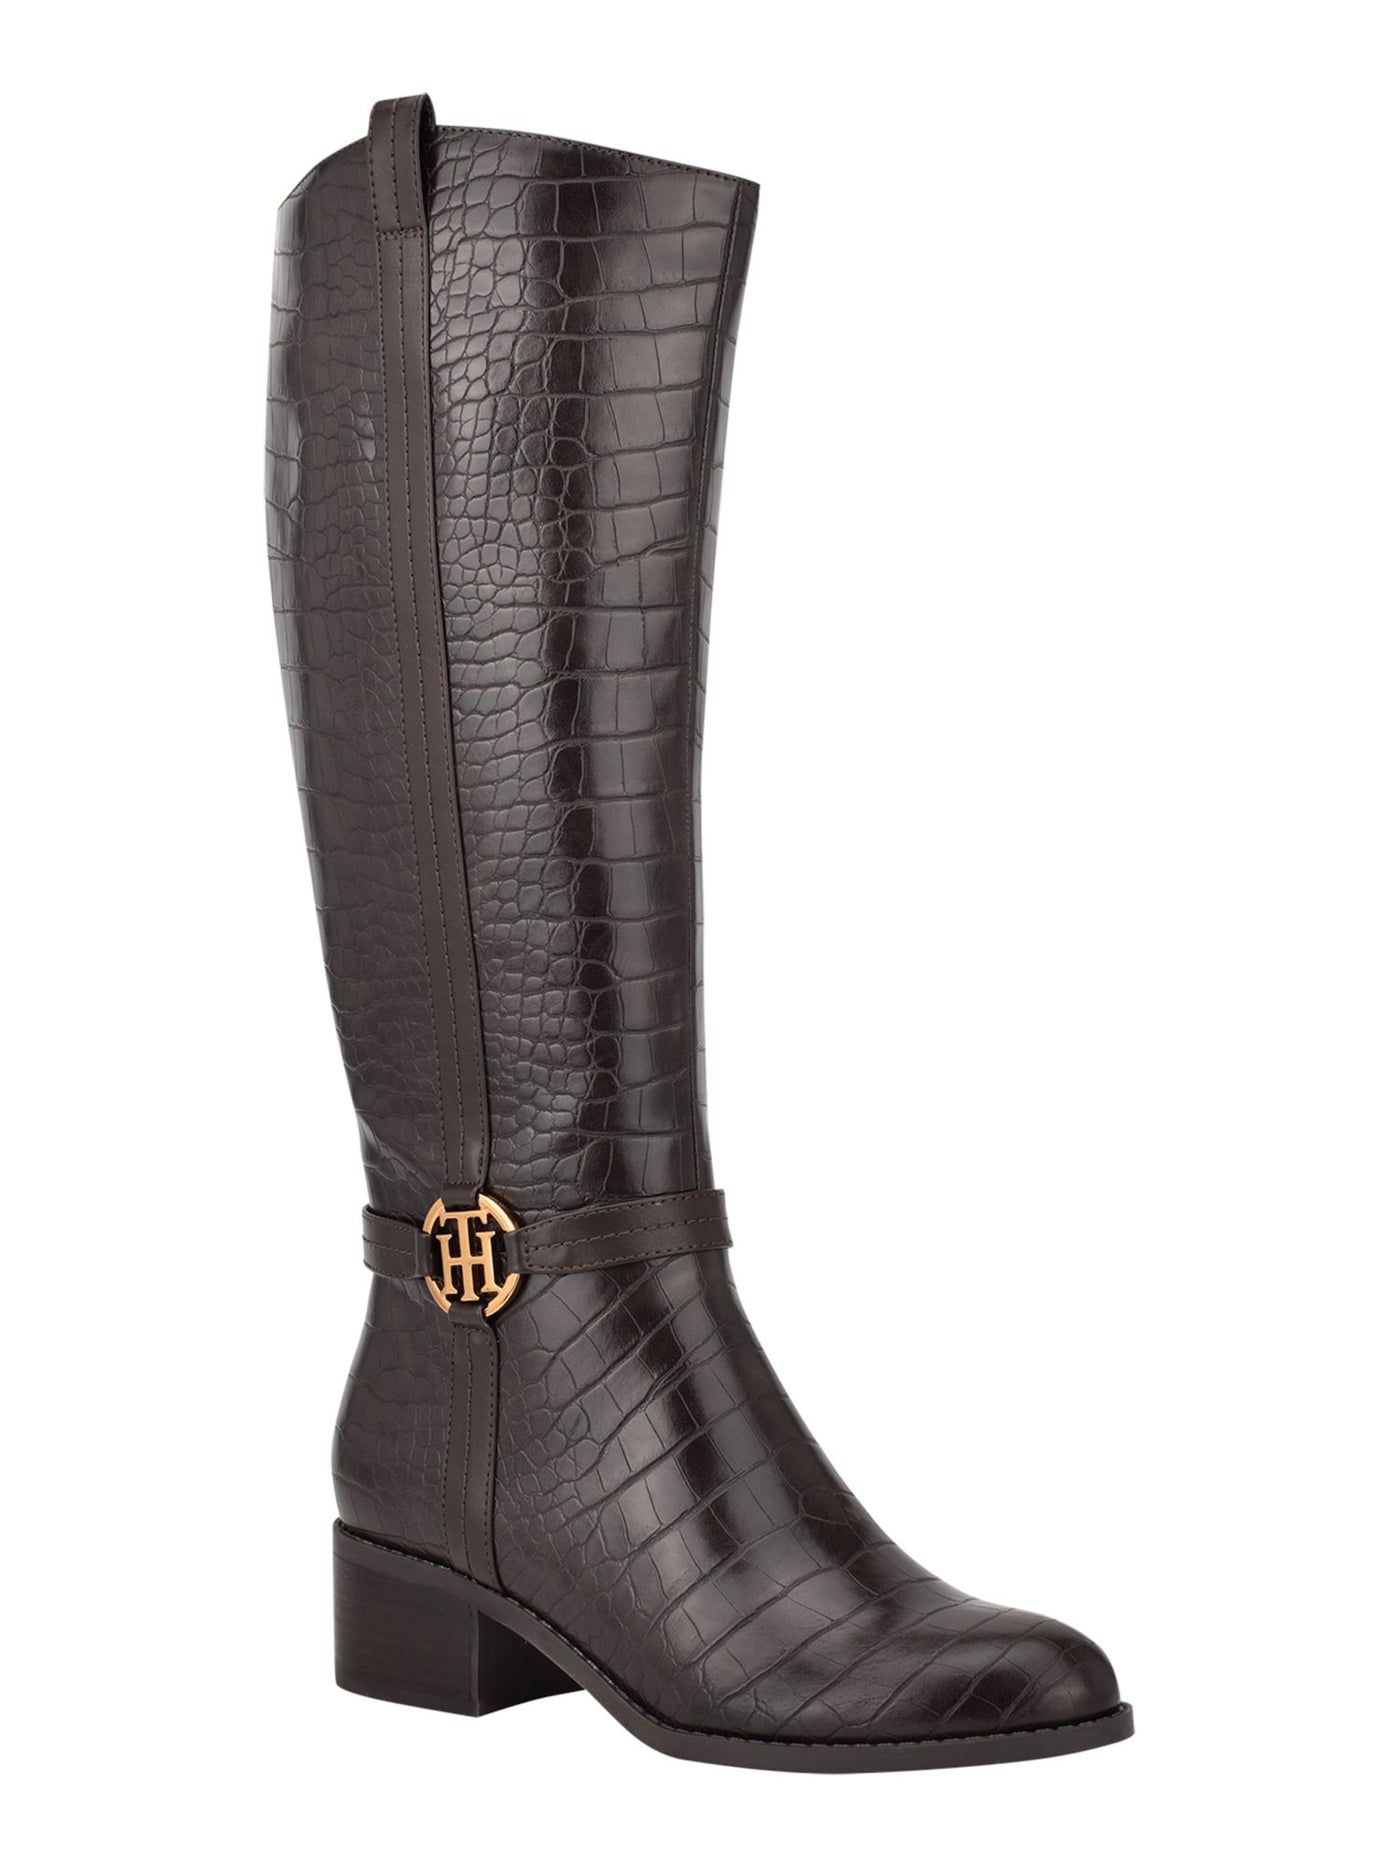 TOMMY HILFIGER Womens Brown Signature Hardware Round Toe Stacked Heel Zip-Up Dress Boots 5.5